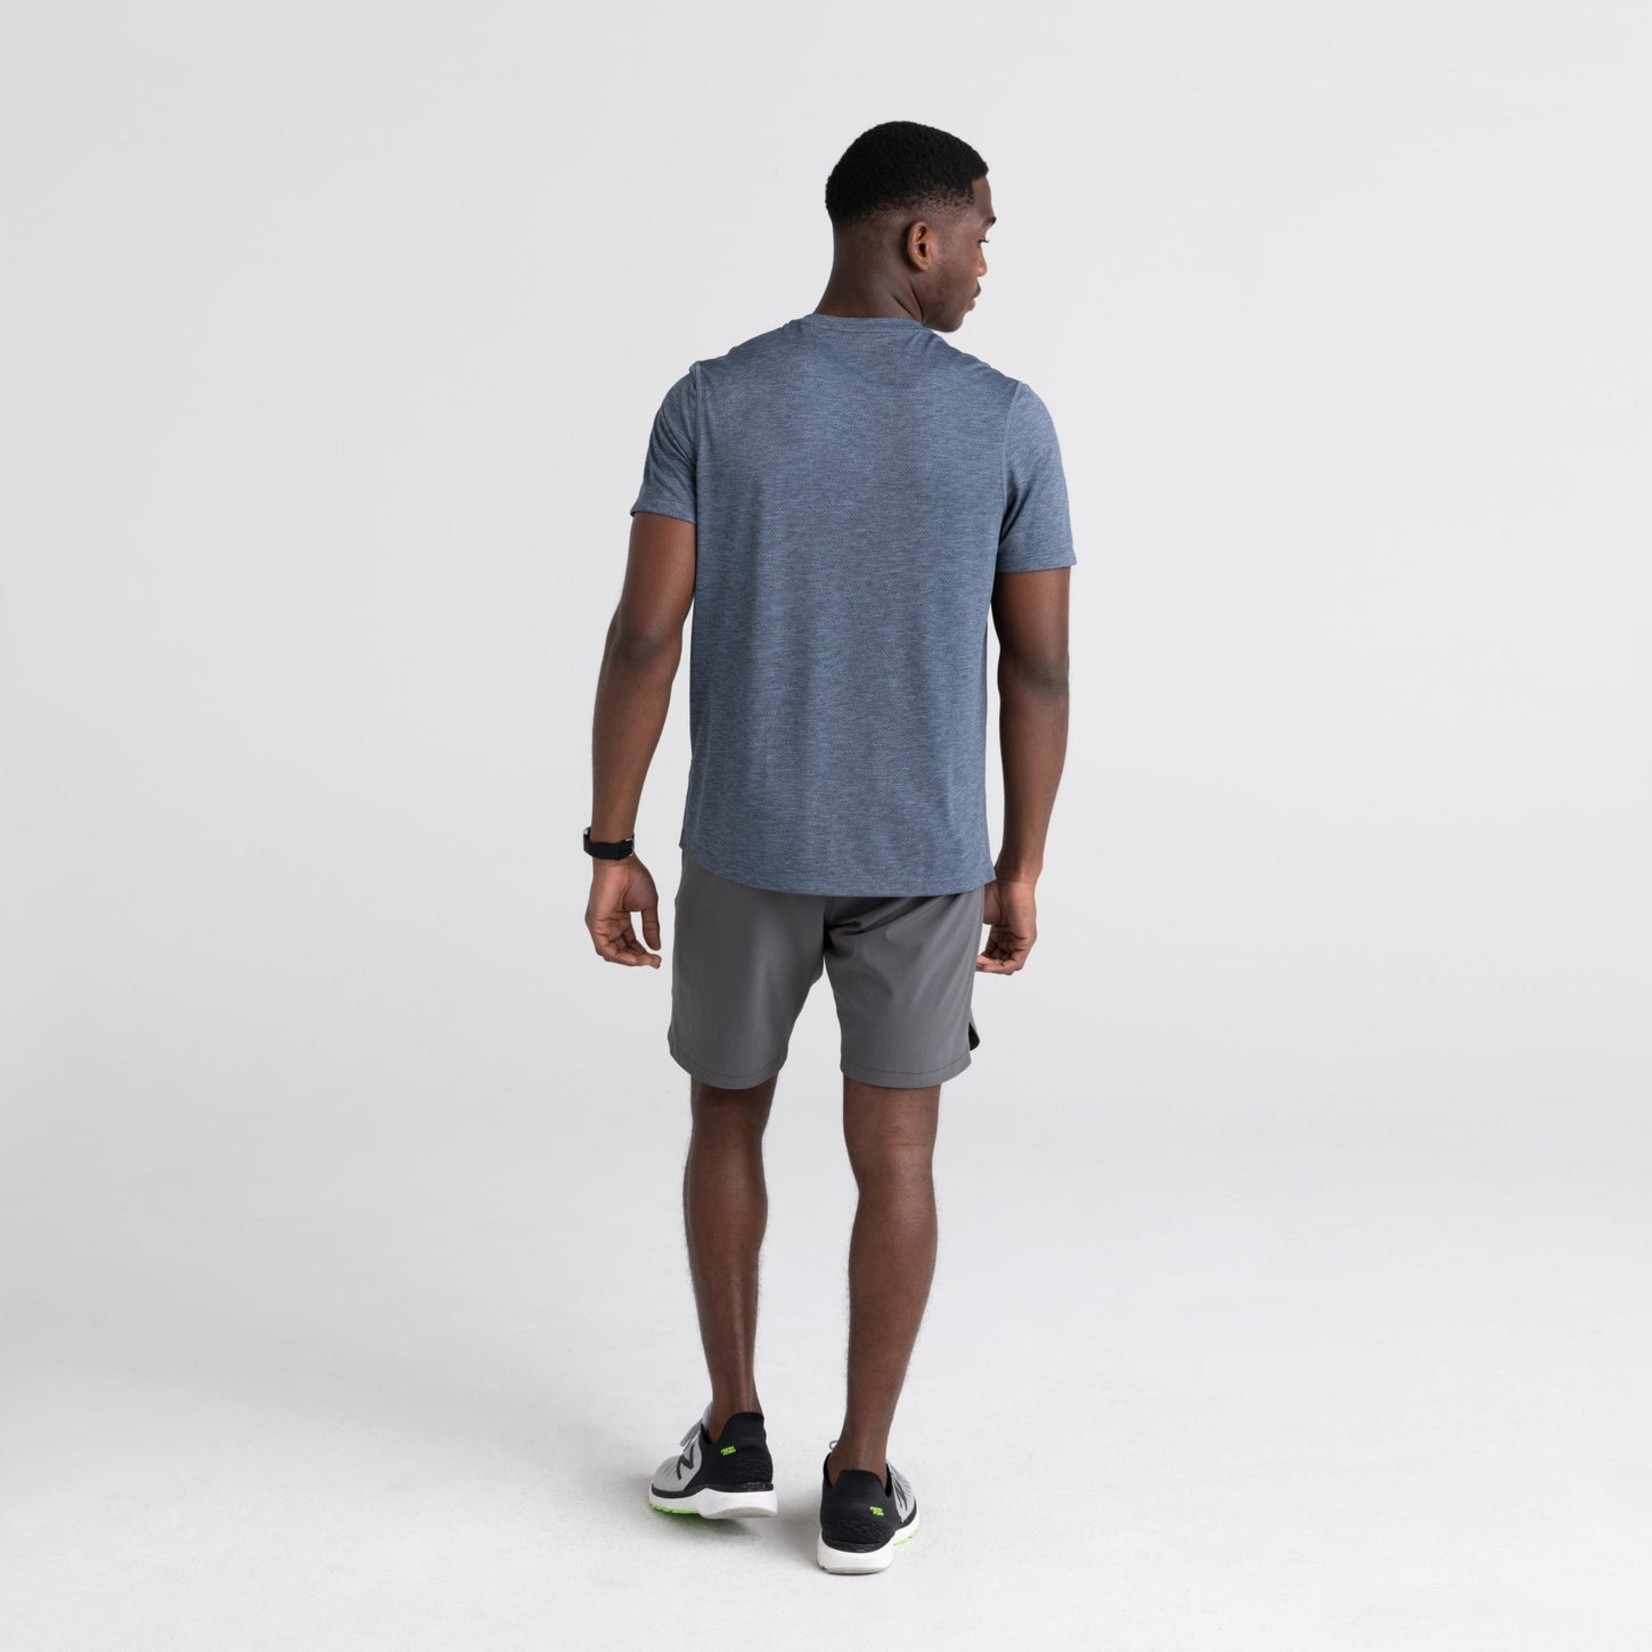 SAXX - All Day Aerator Tee (SXSC14) - Ford and McIntyre Men's Wear